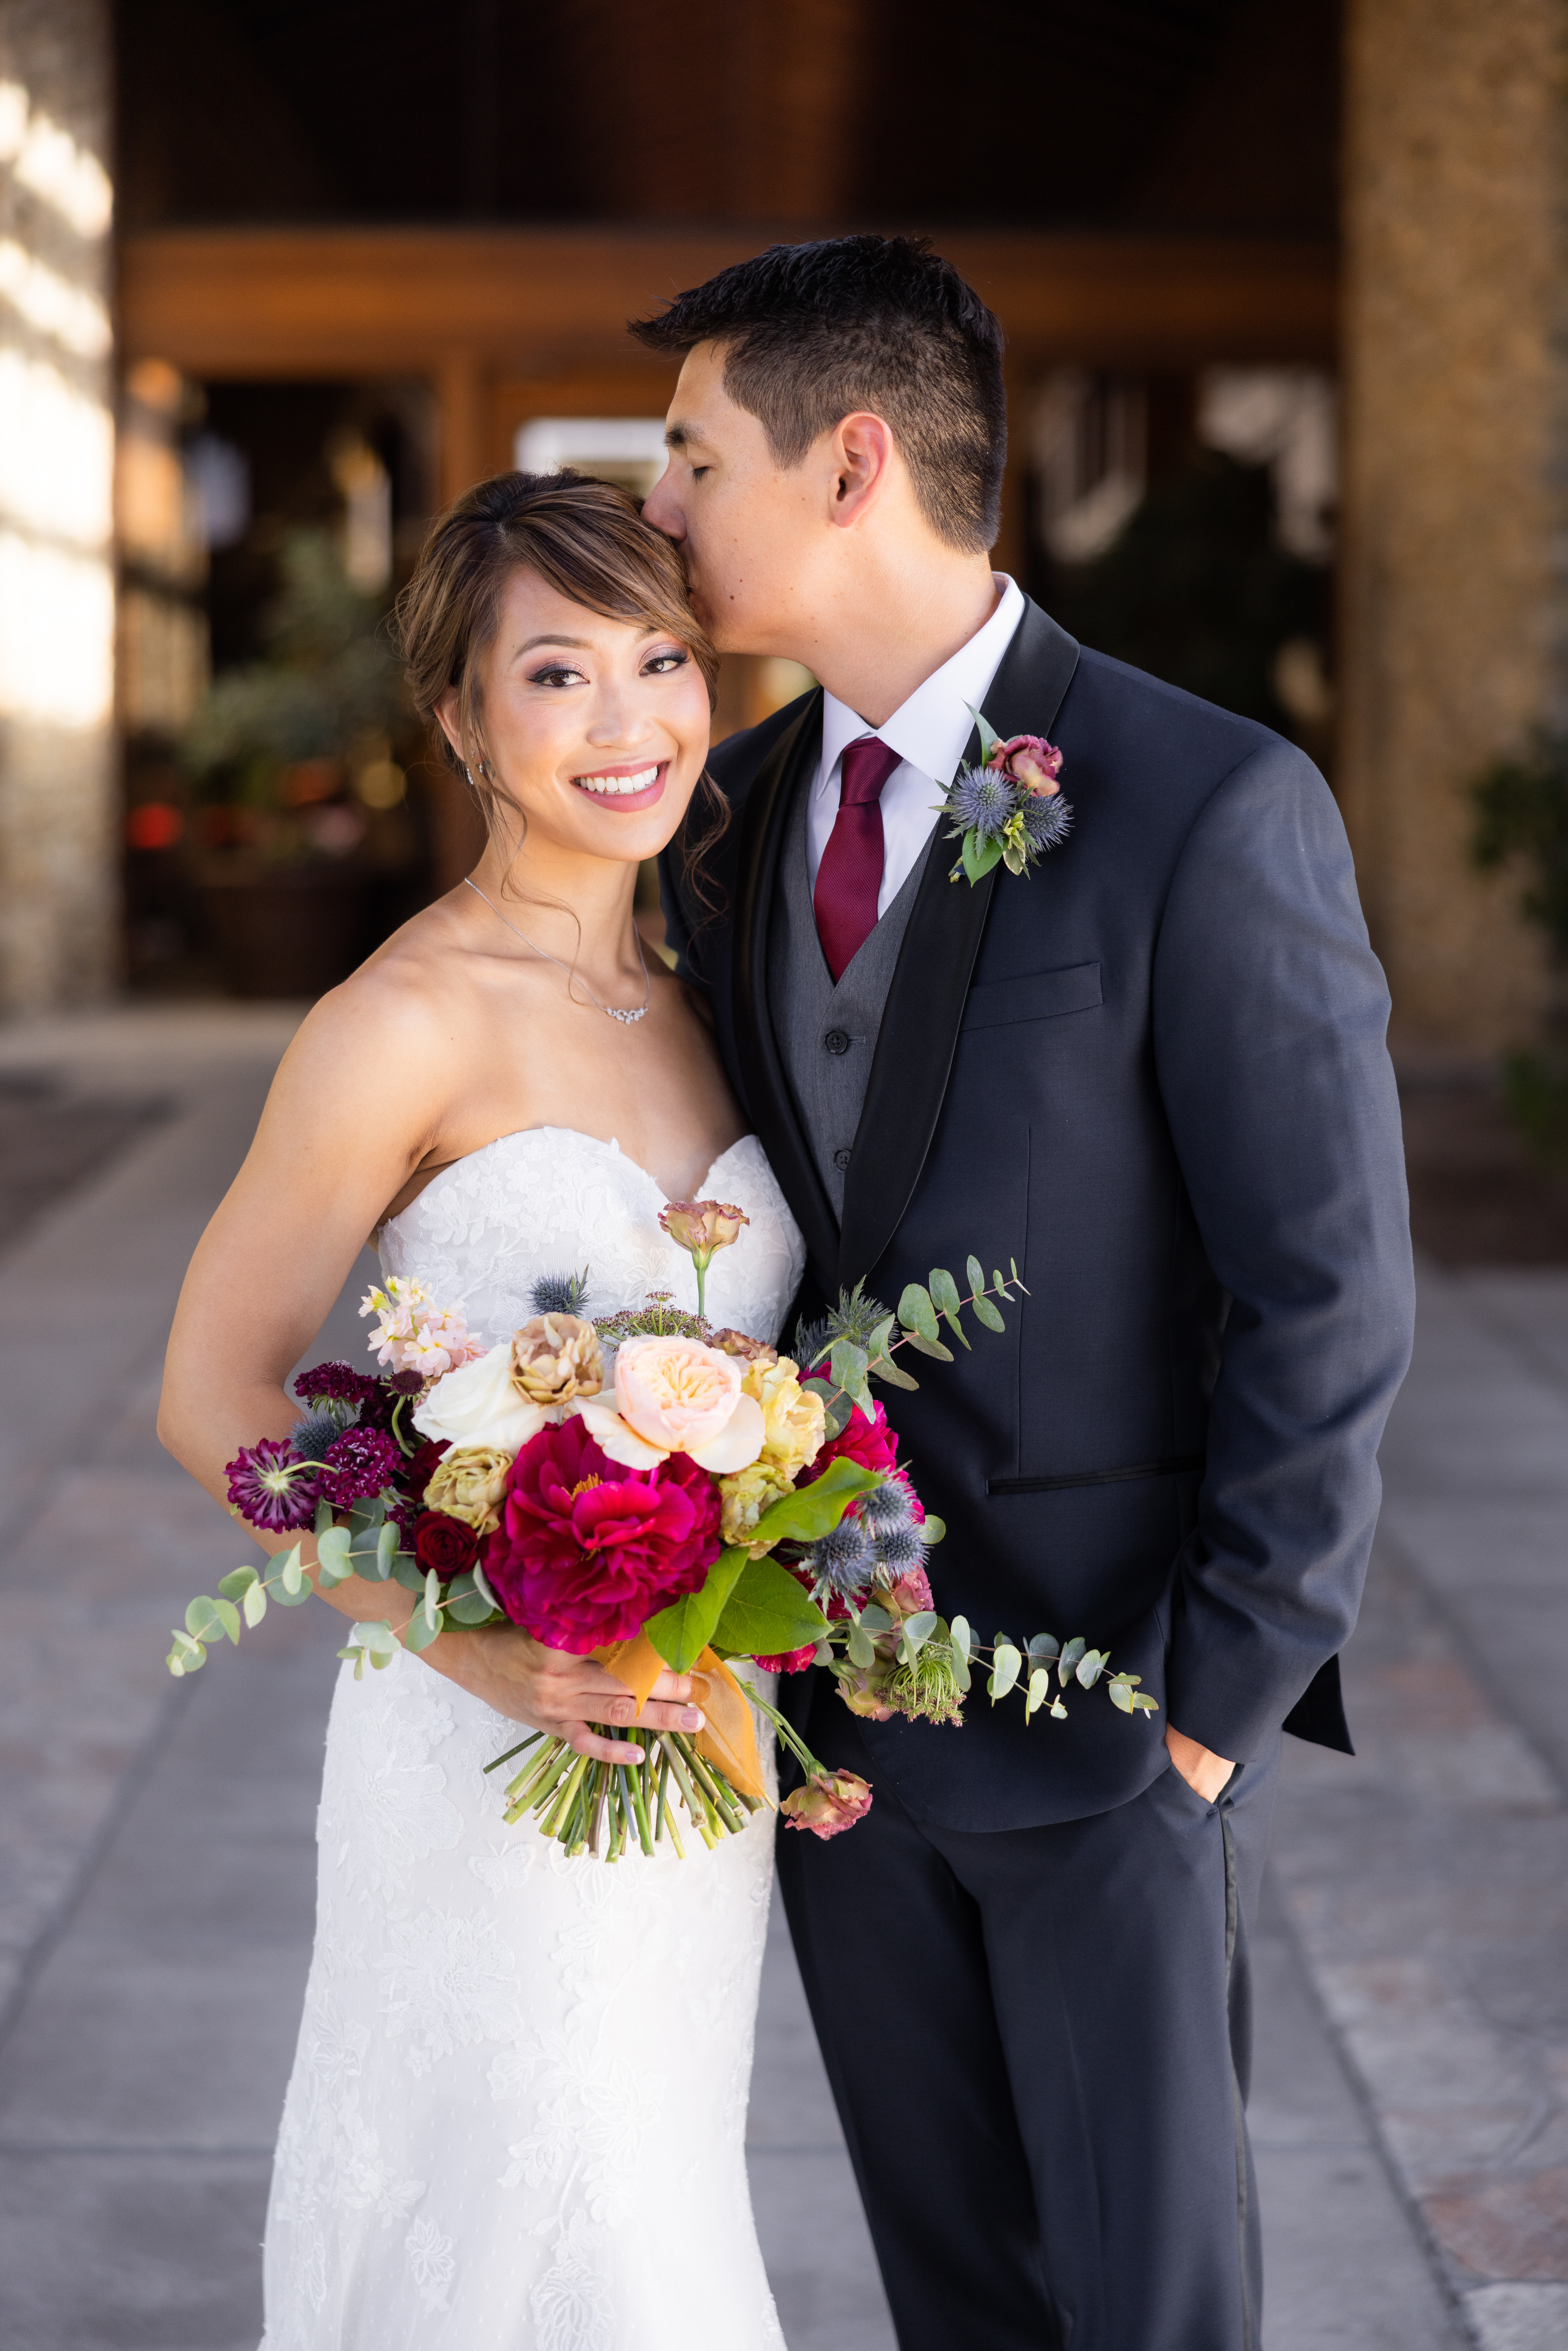 bride in strapless lace wedding dress with jewel toned bridal bouquet stands with groom in navy suit with black lapels, grey vest and maroon tie